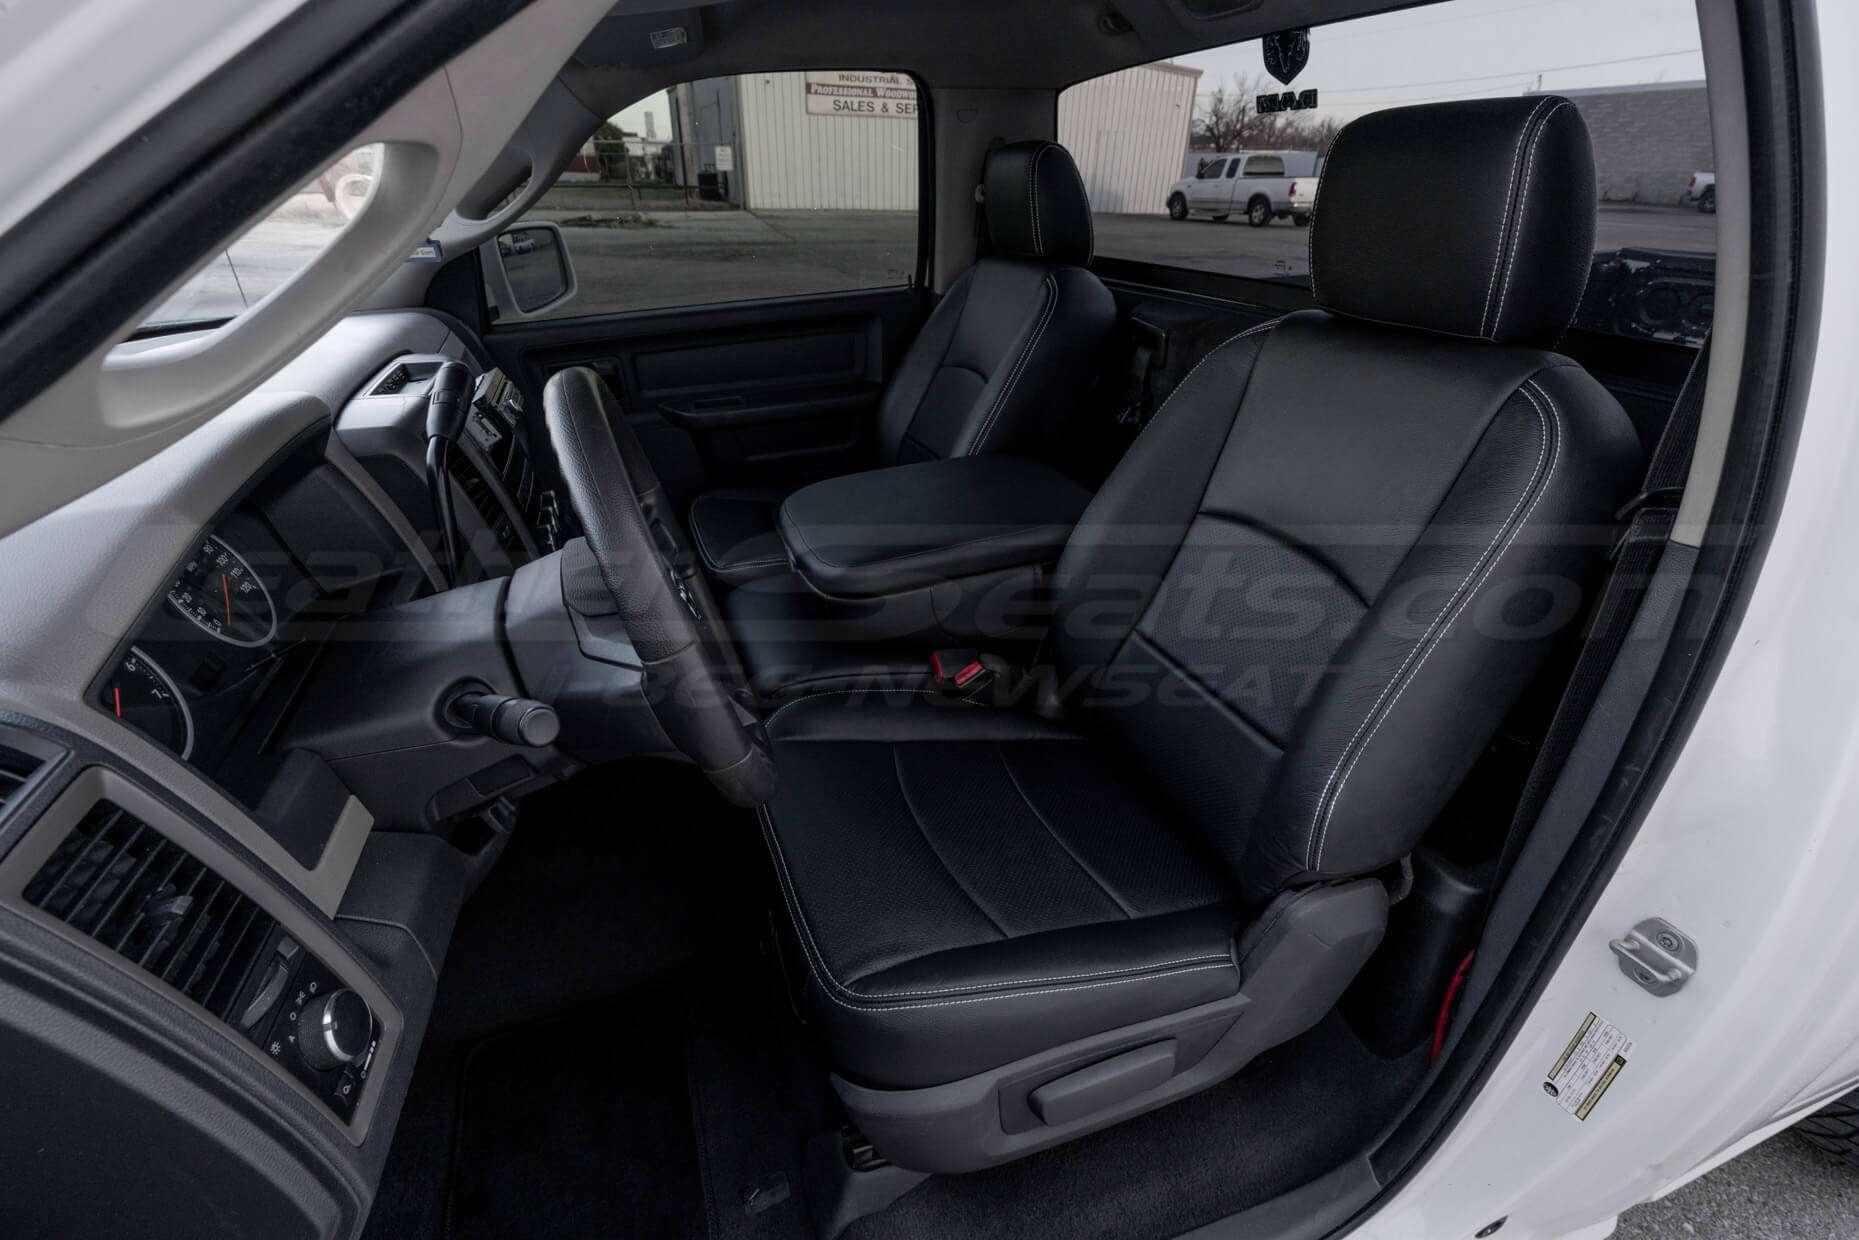 odge Ram Regular Cab Installed LEather Seats - Black - Front seats from drivers side